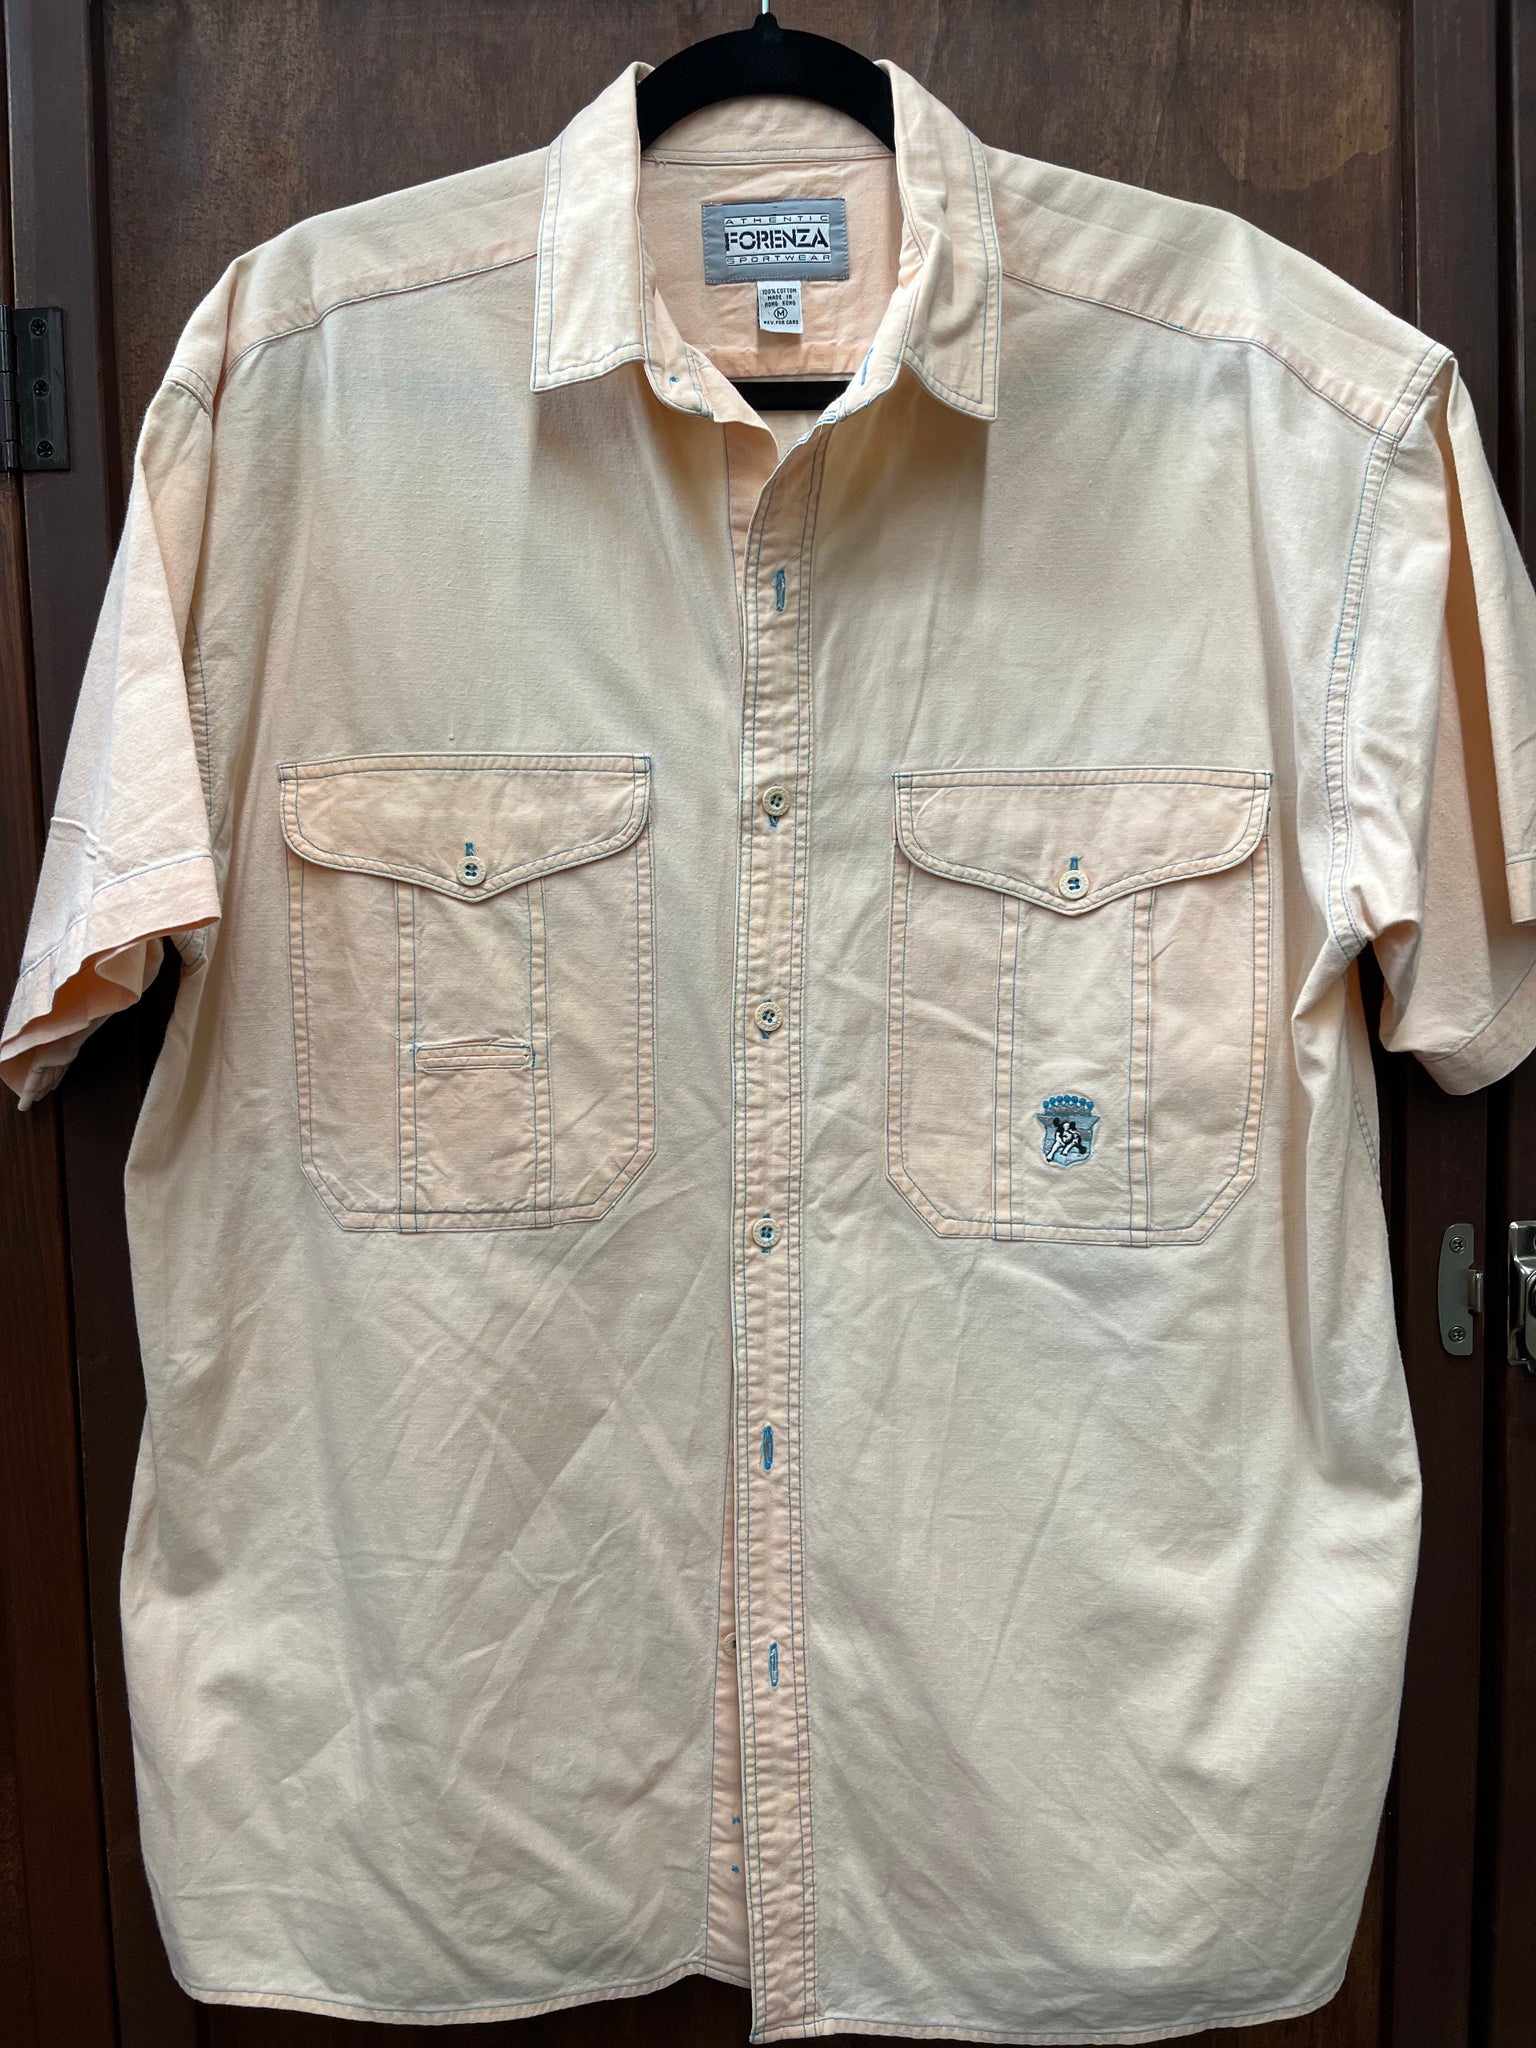 1990s MENS TOP- Forenza peach s/s cotton